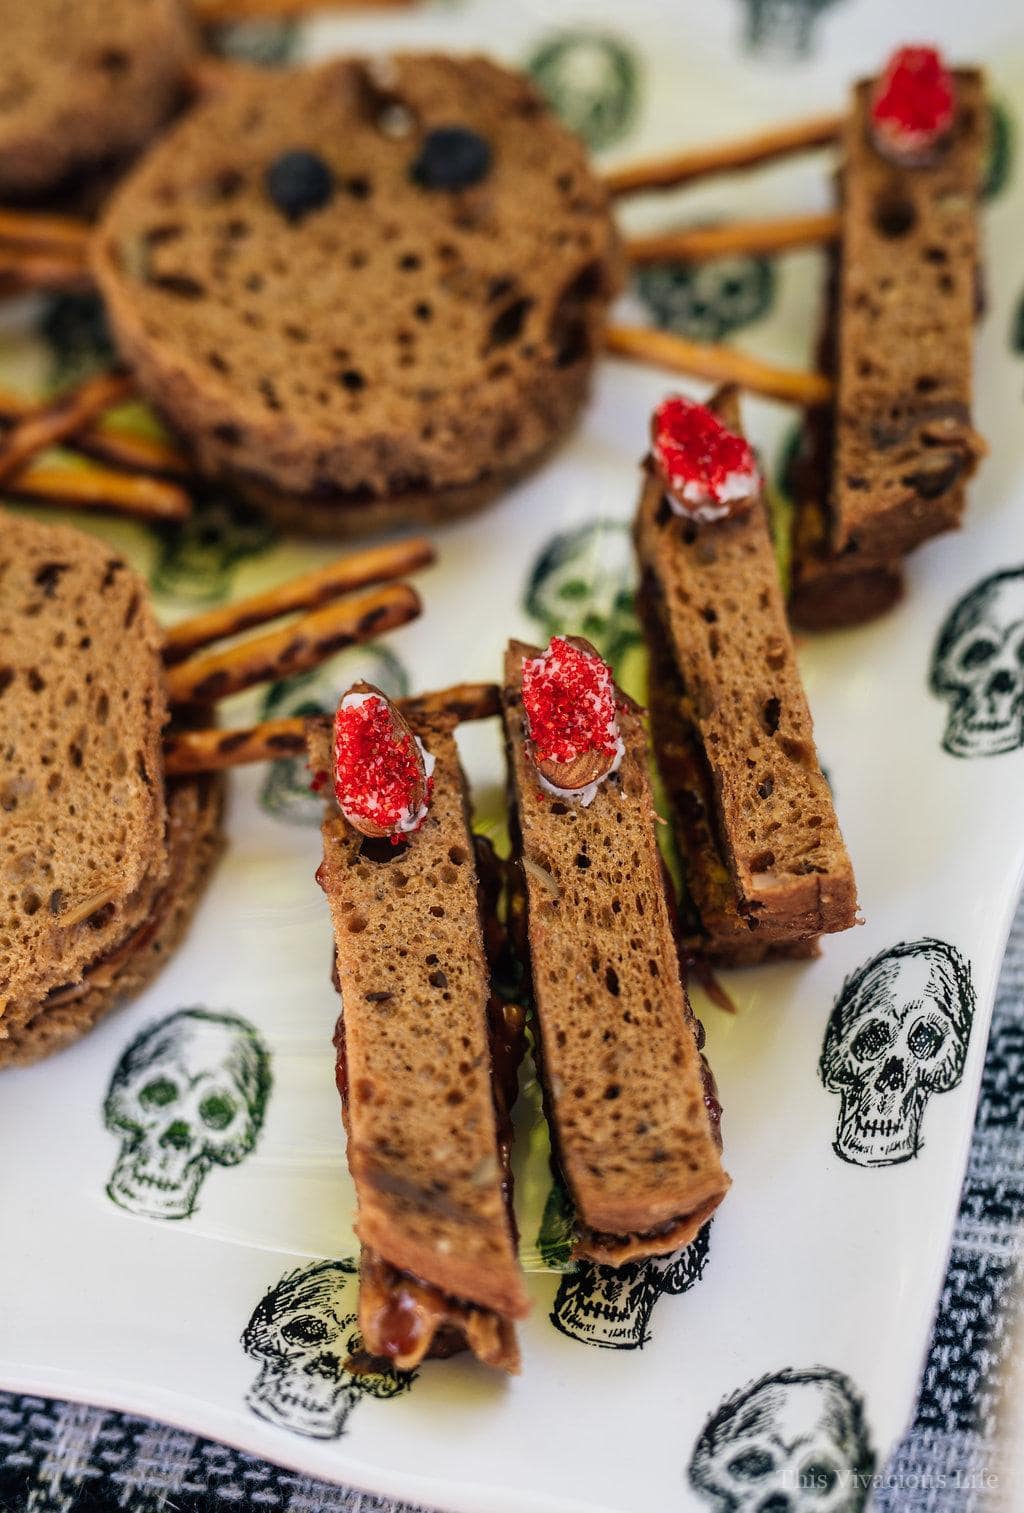 This spooky sandwich bar Halloween party is such a fun one especially for little ones. They will love the variety of fun sandwiches and eerie decor. | fun halloween ideas for kids | halloween party ideas | halloween recipe ideas | fun halloween food for kids | kid-friendly halloween recipes | halloween recipes for kids | spooky recipe ideas || This Vivacious Life #halloween #spooky #glutenfree #glutenfreehalloween #sandwiches #kidfriendly #halloweenparty #kidshalloween #thisvivaciouslife